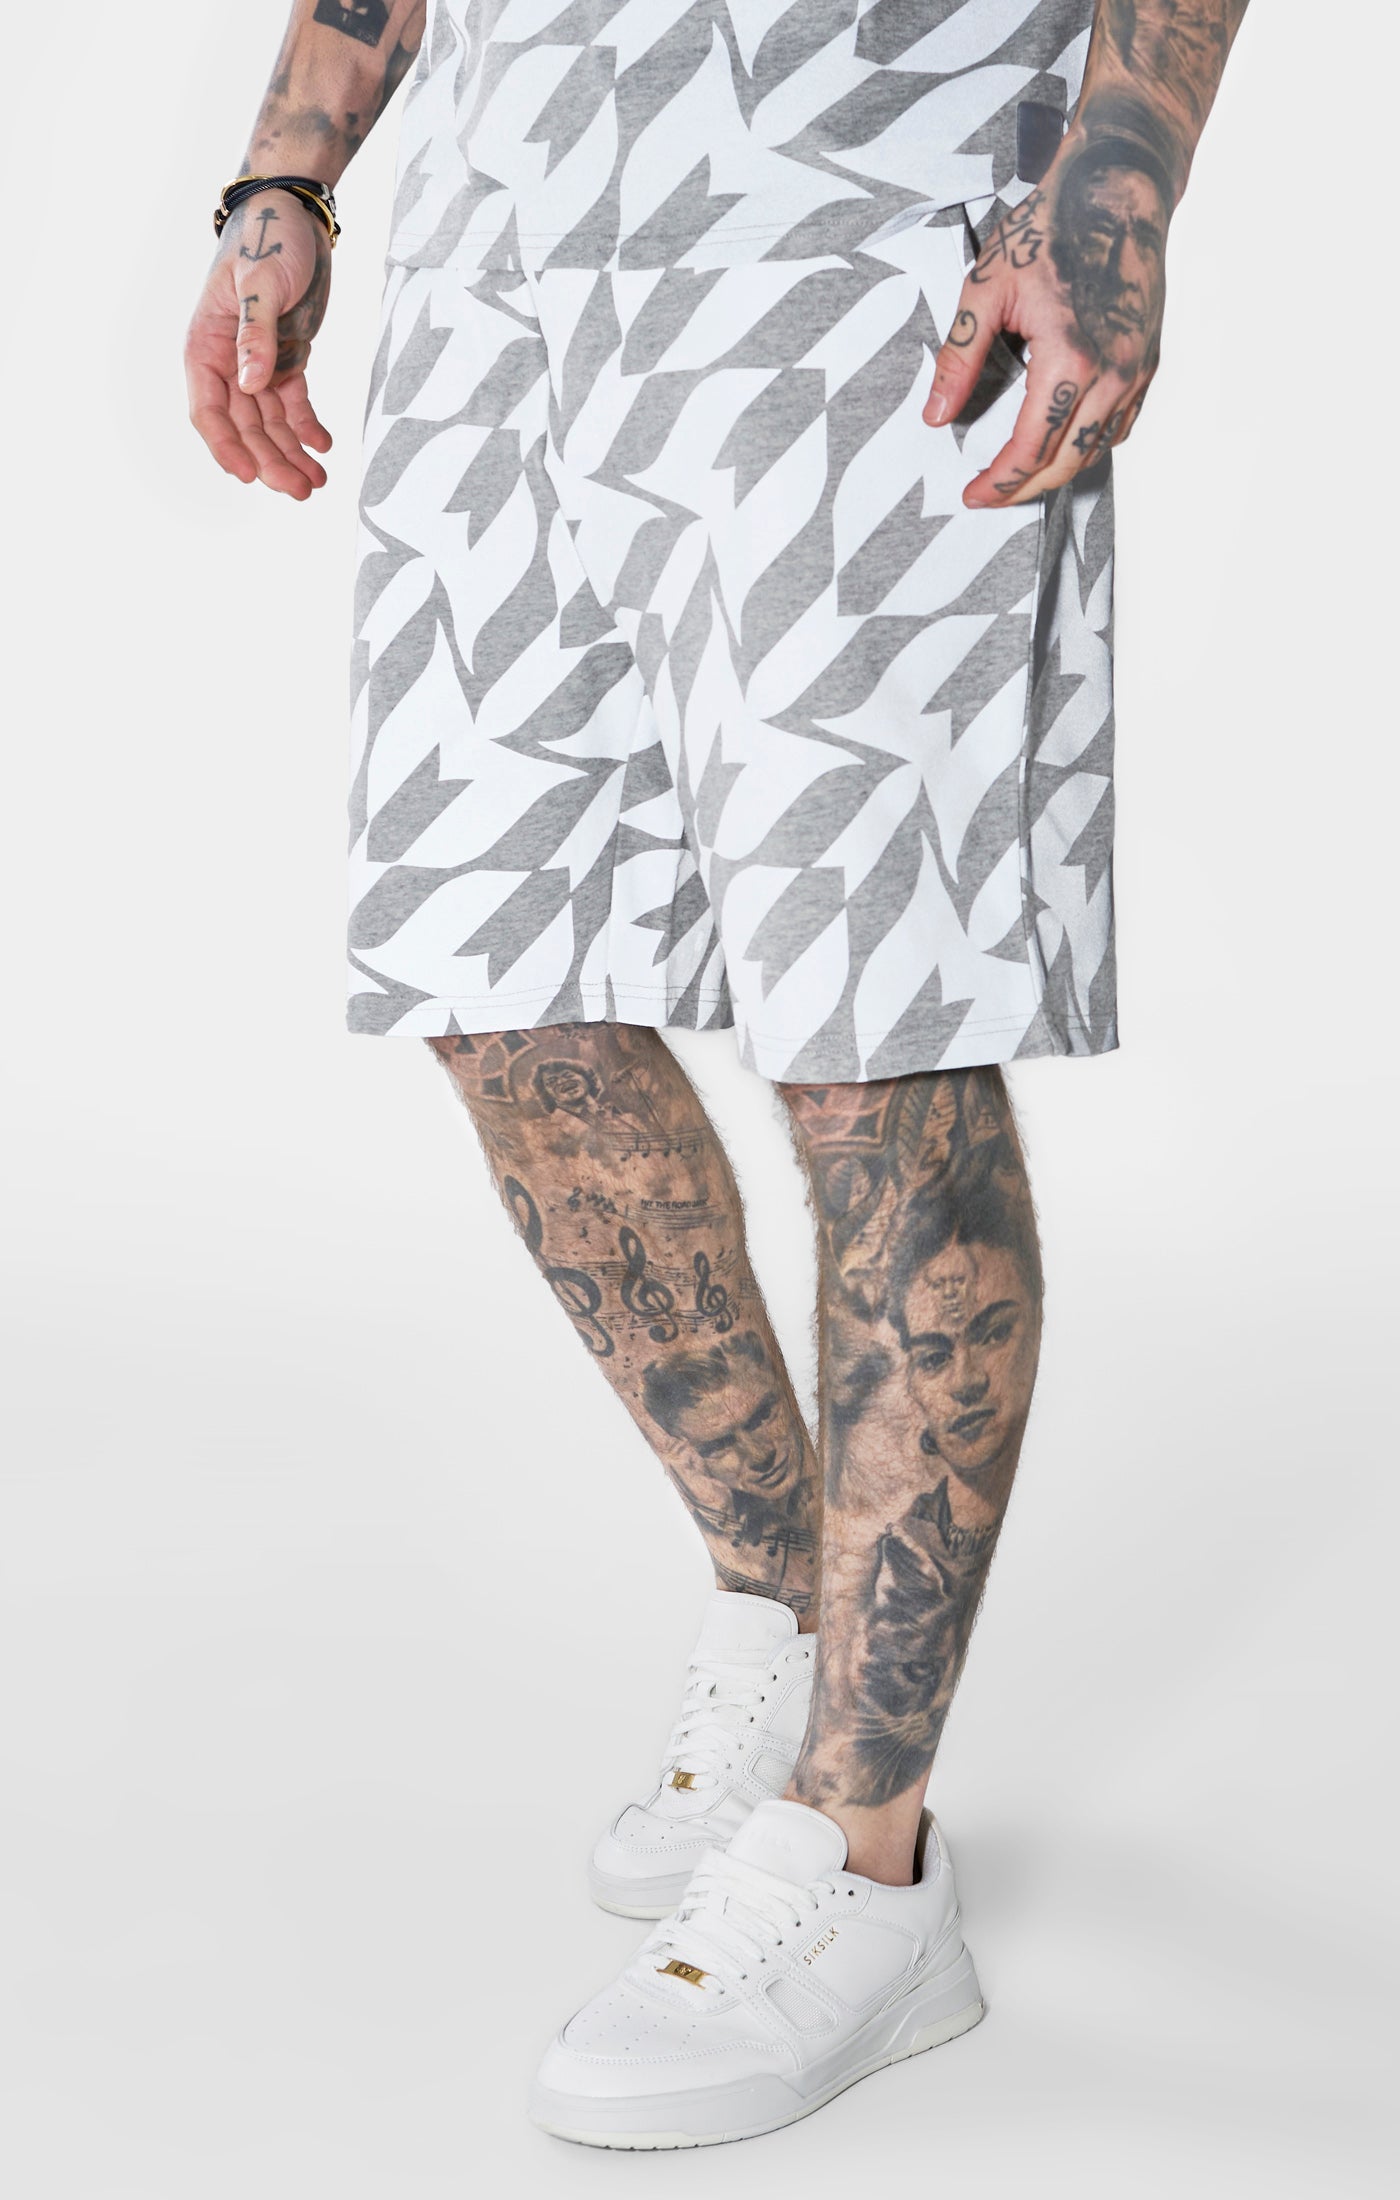 Load image into Gallery viewer, Messi x SikSilk Silver Print Shorts - Grey Marl (7)